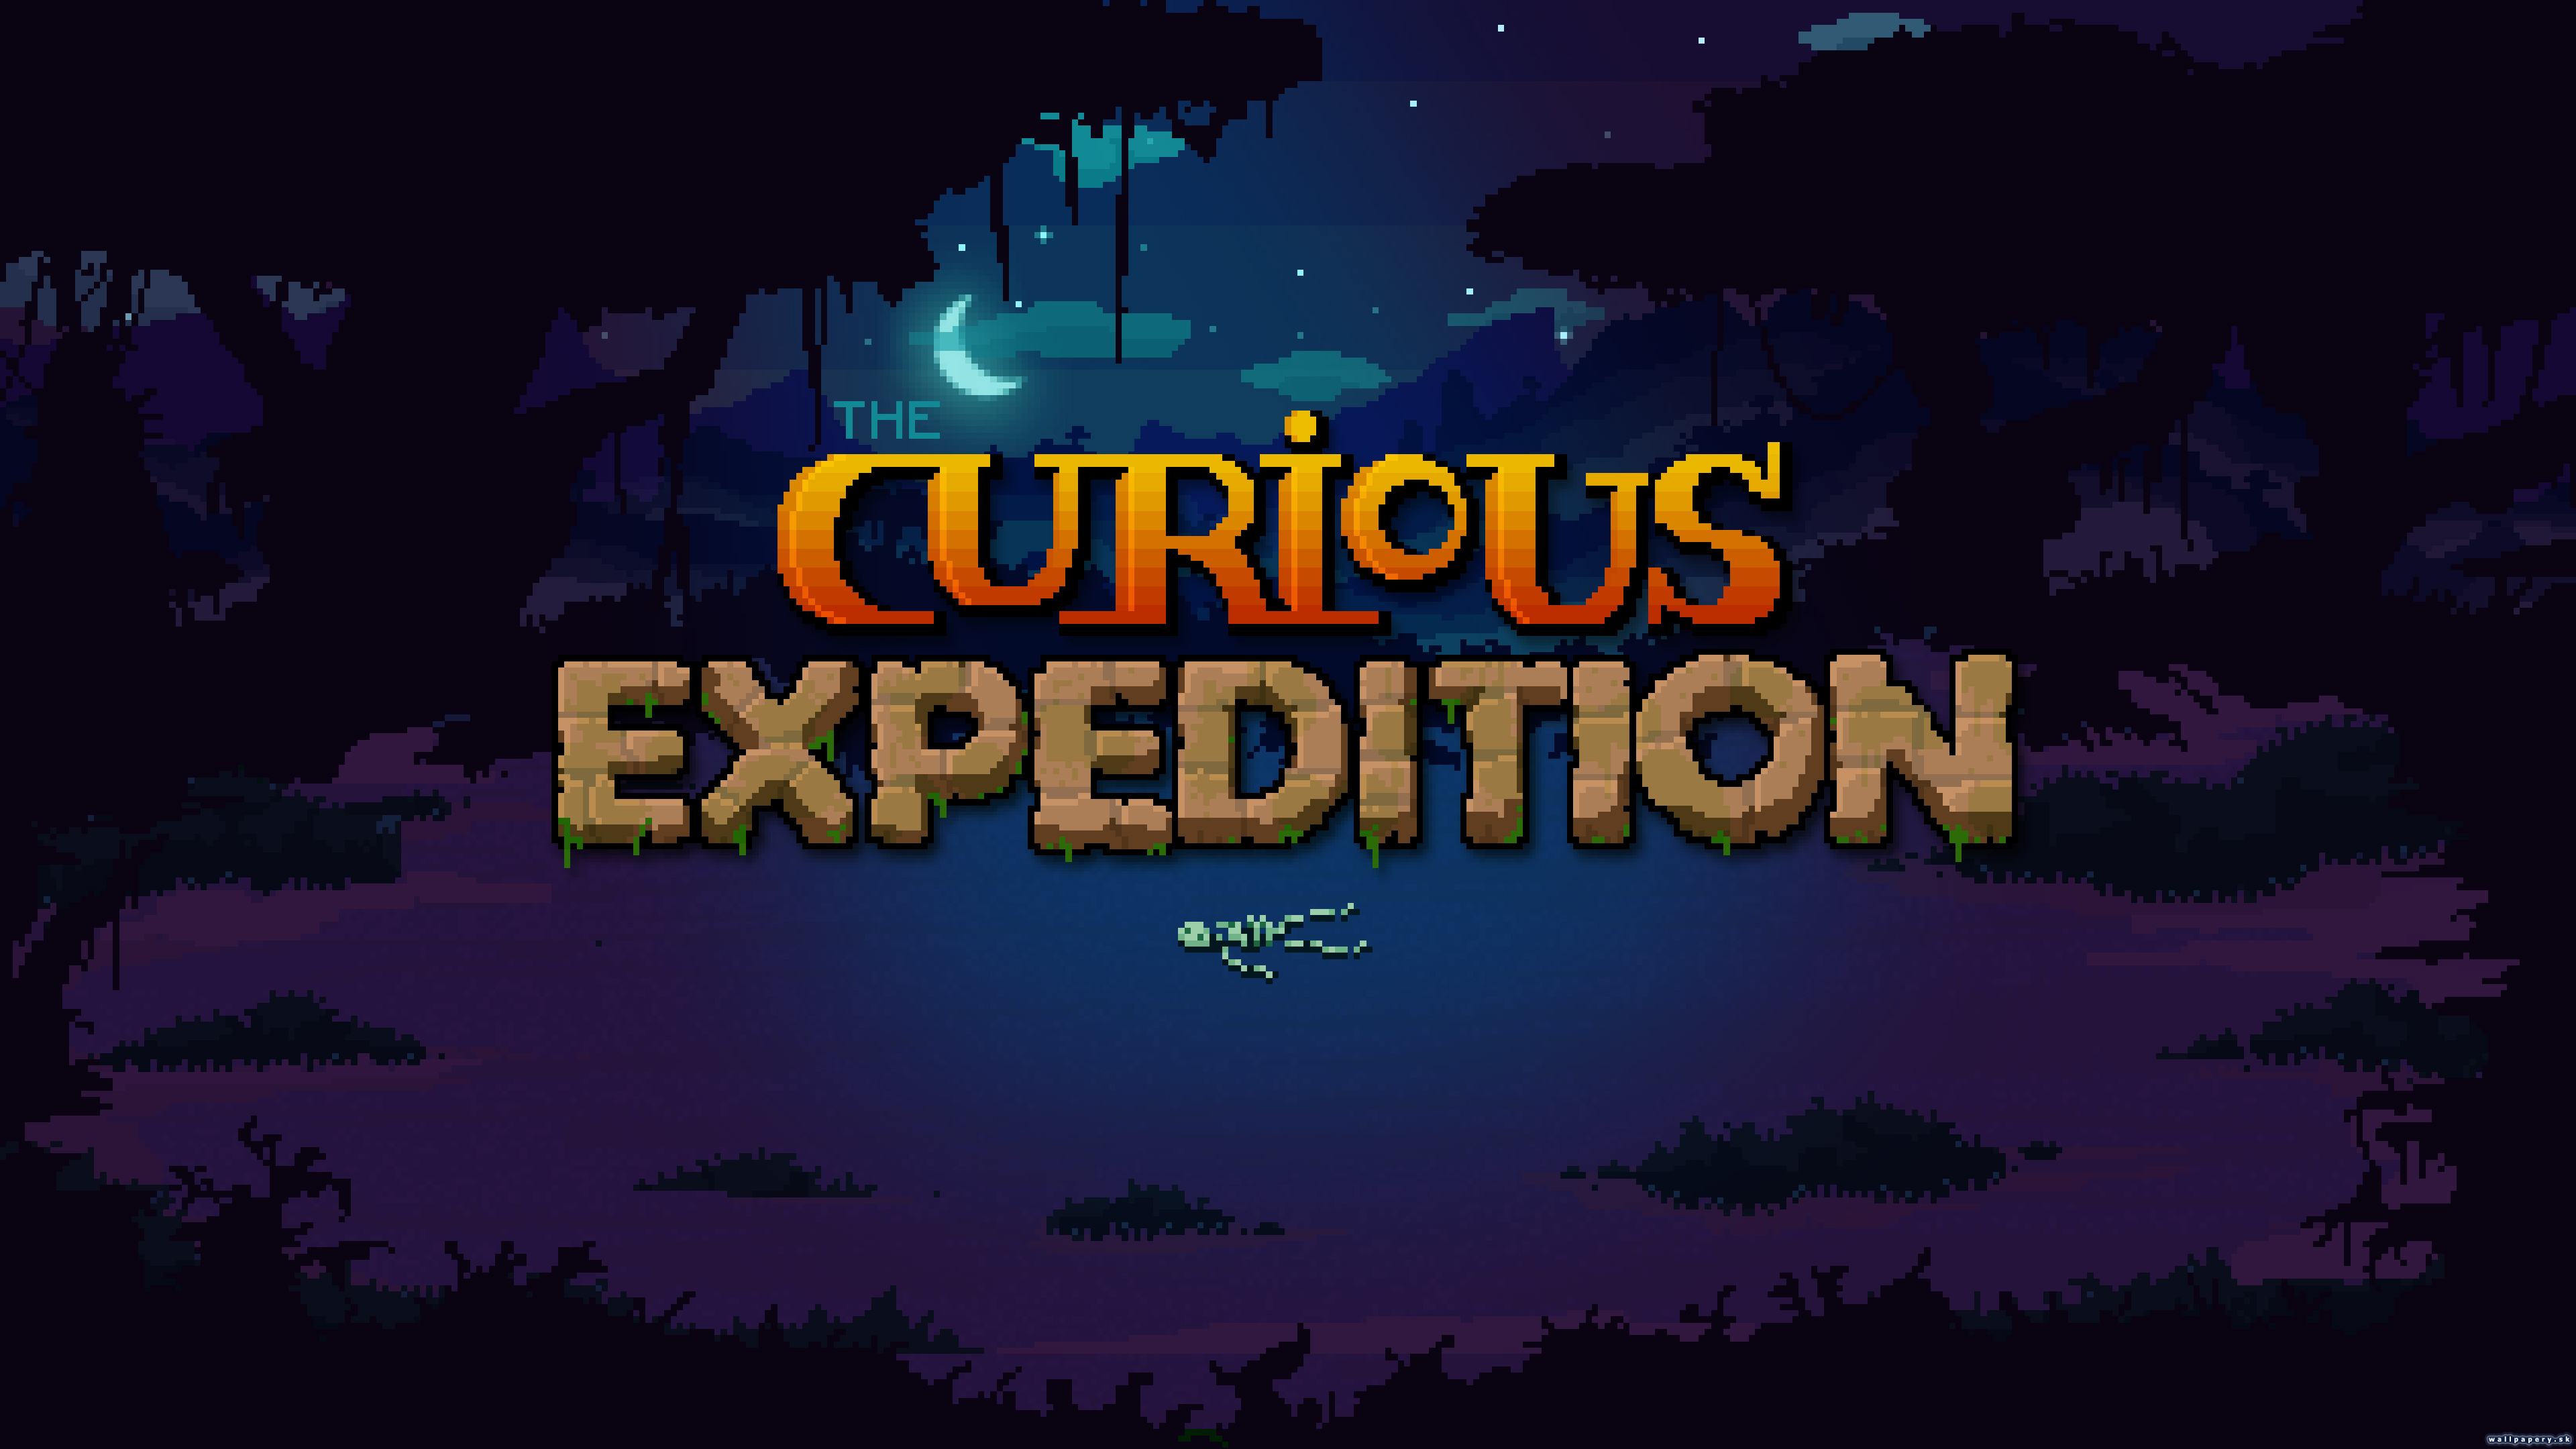 Curious Expedition - wallpaper 4